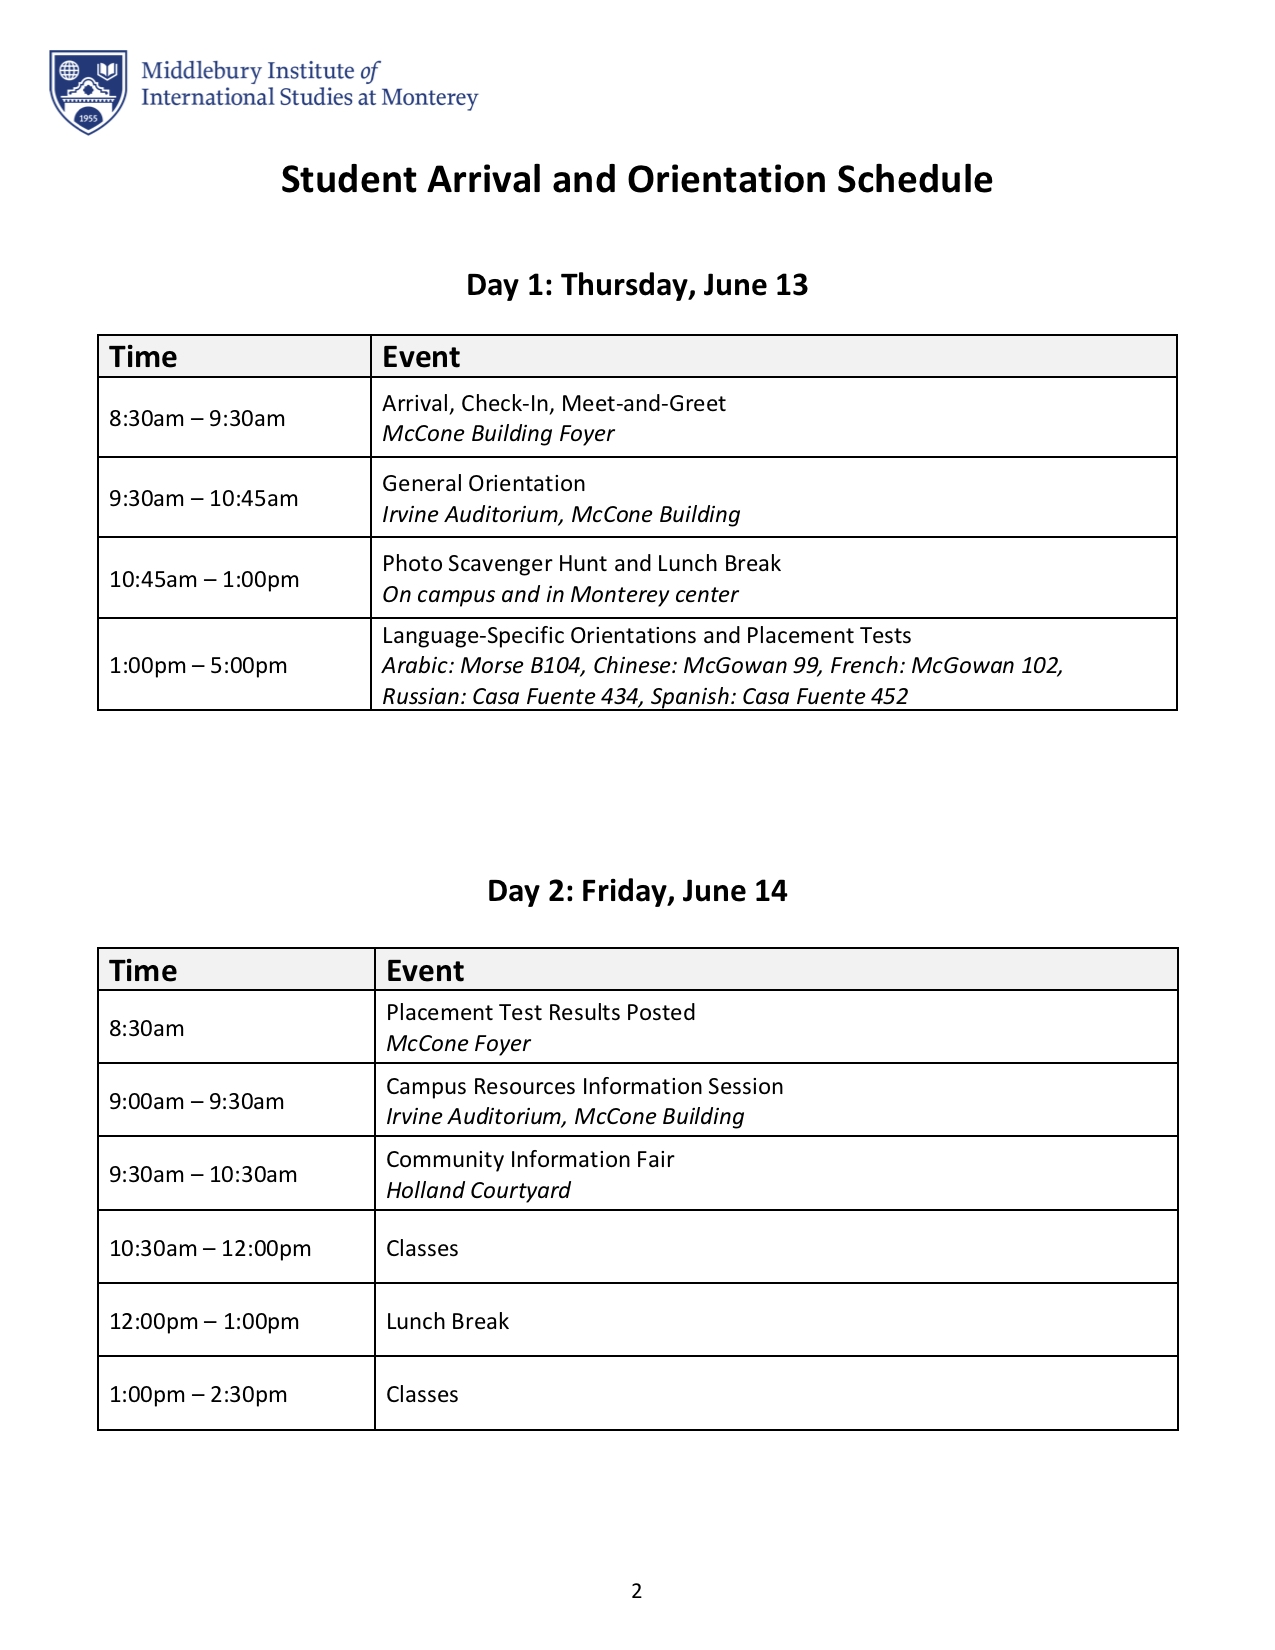 Student Arrival and Orientation Schedule